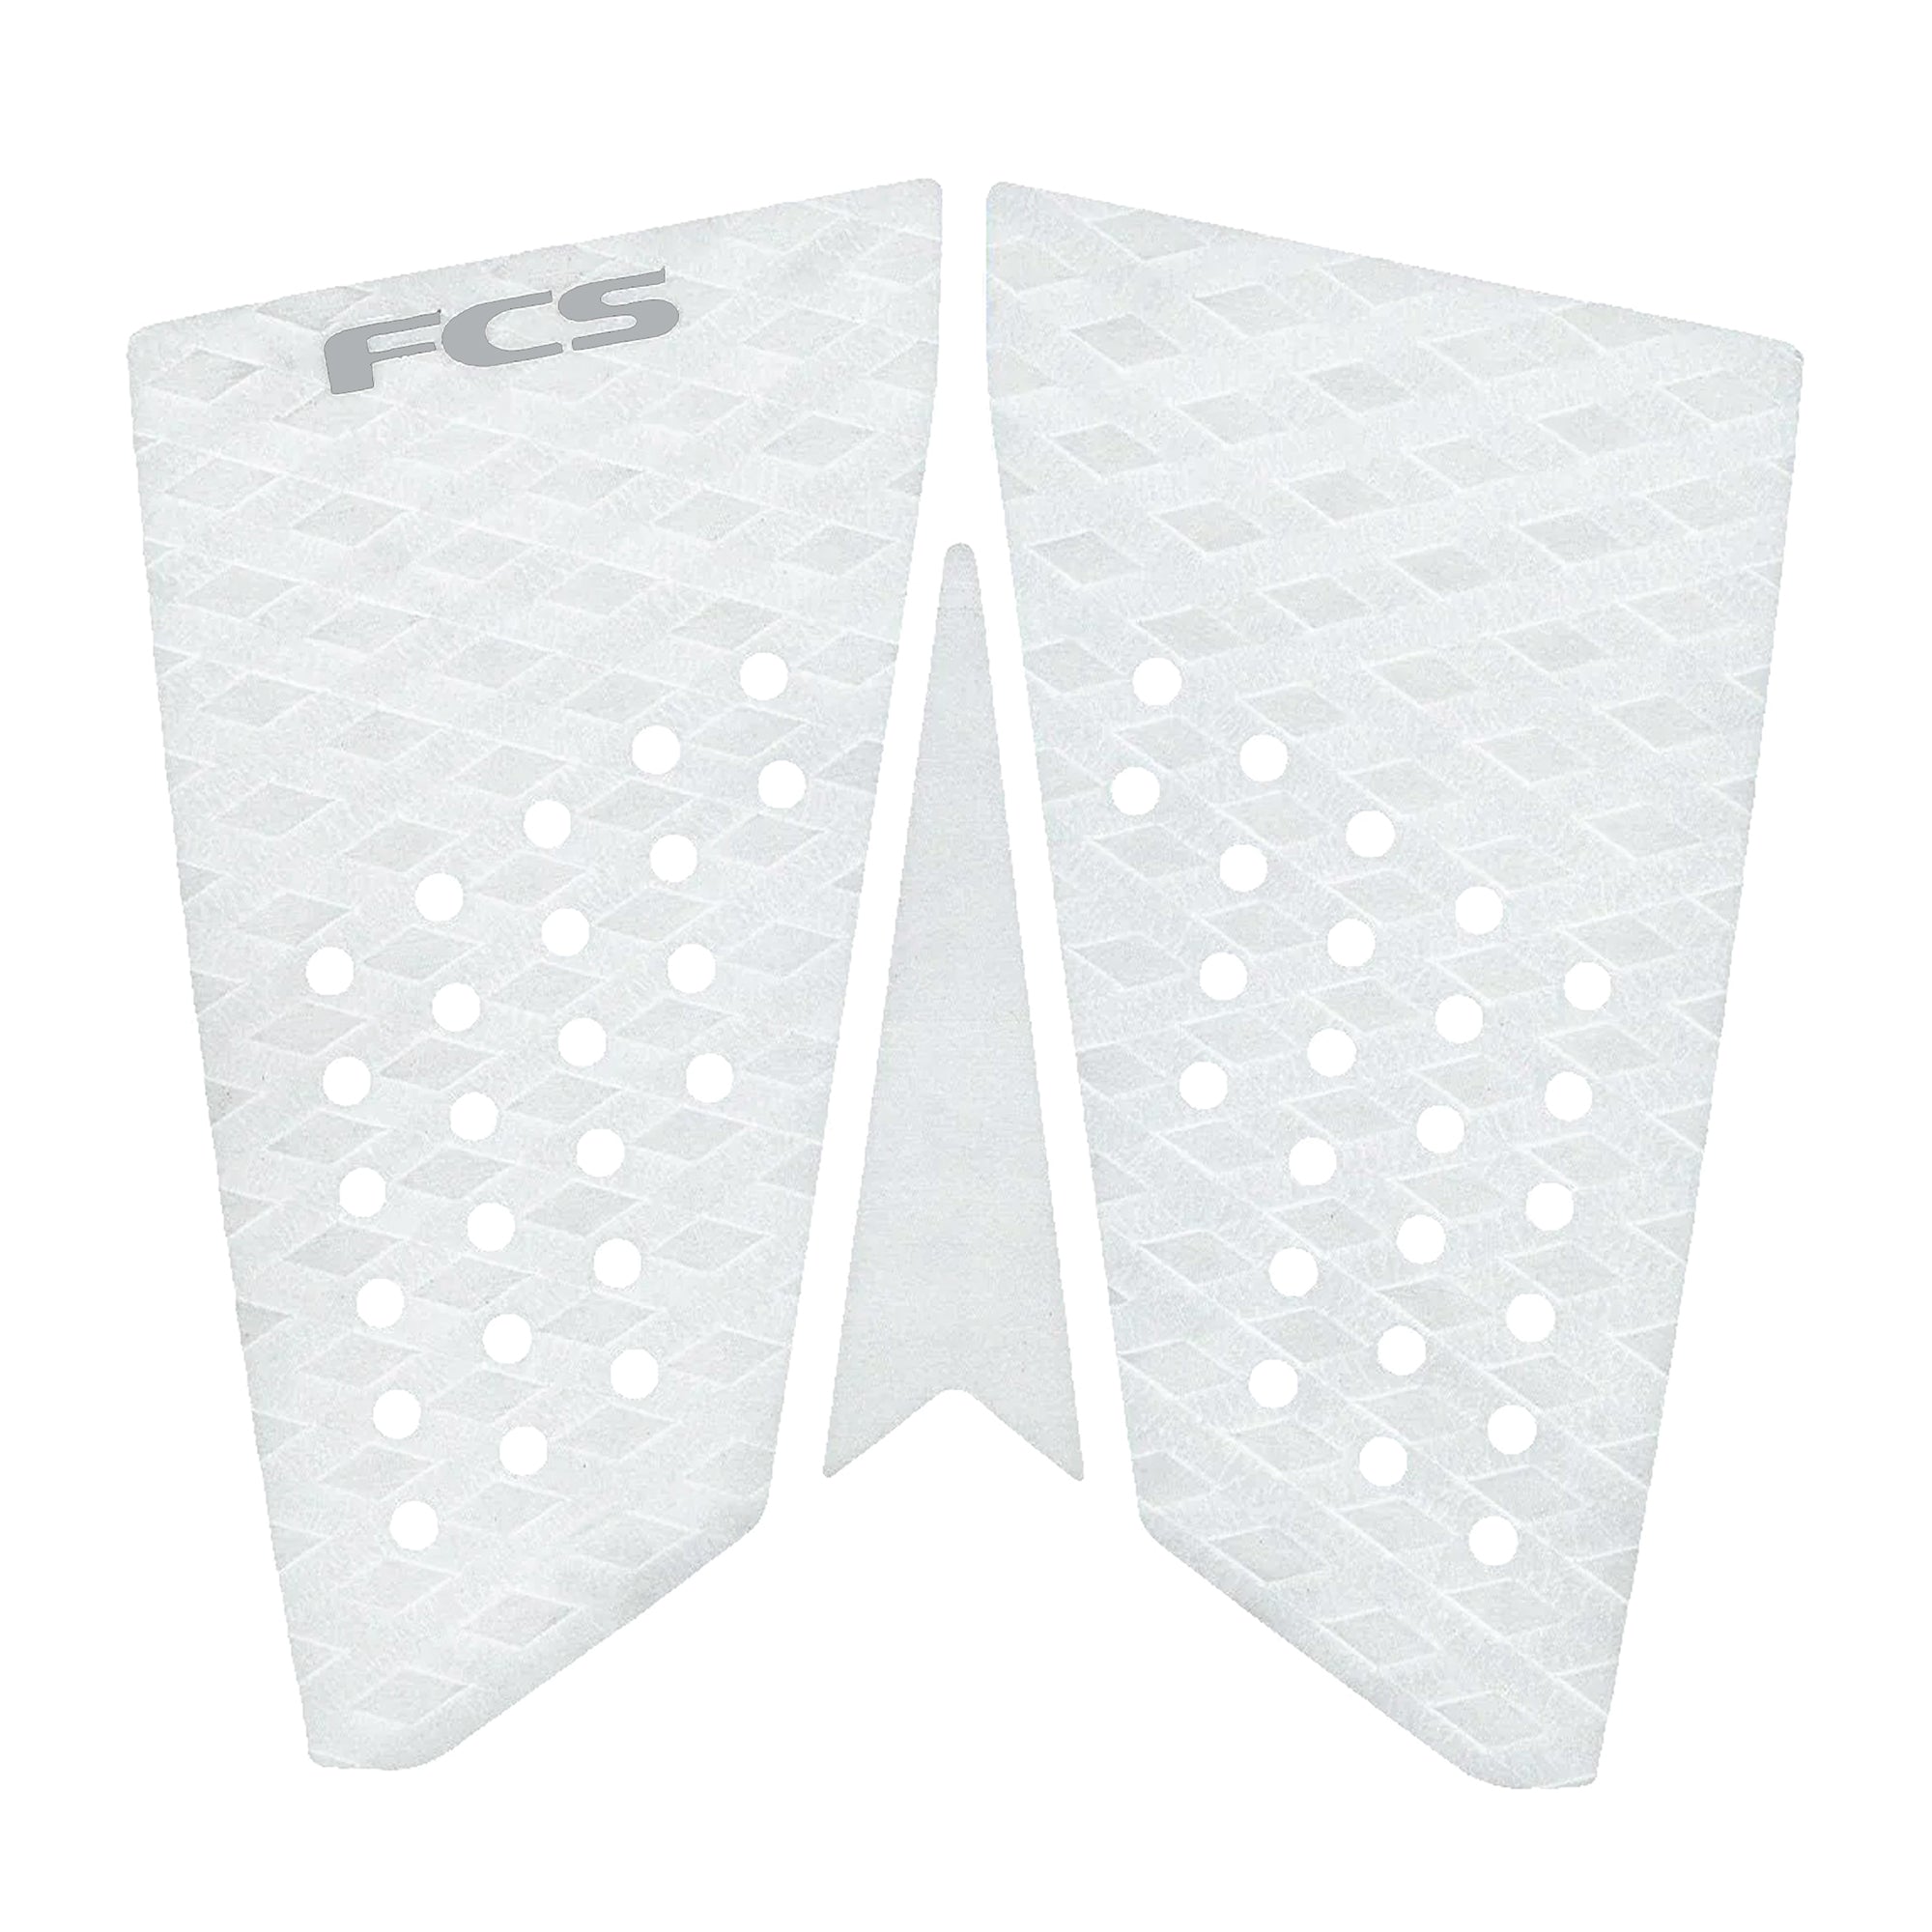 FCS T-3 Fish Eco Traction White Cool Grey - Junglesurf Store - Bali - Indonesia